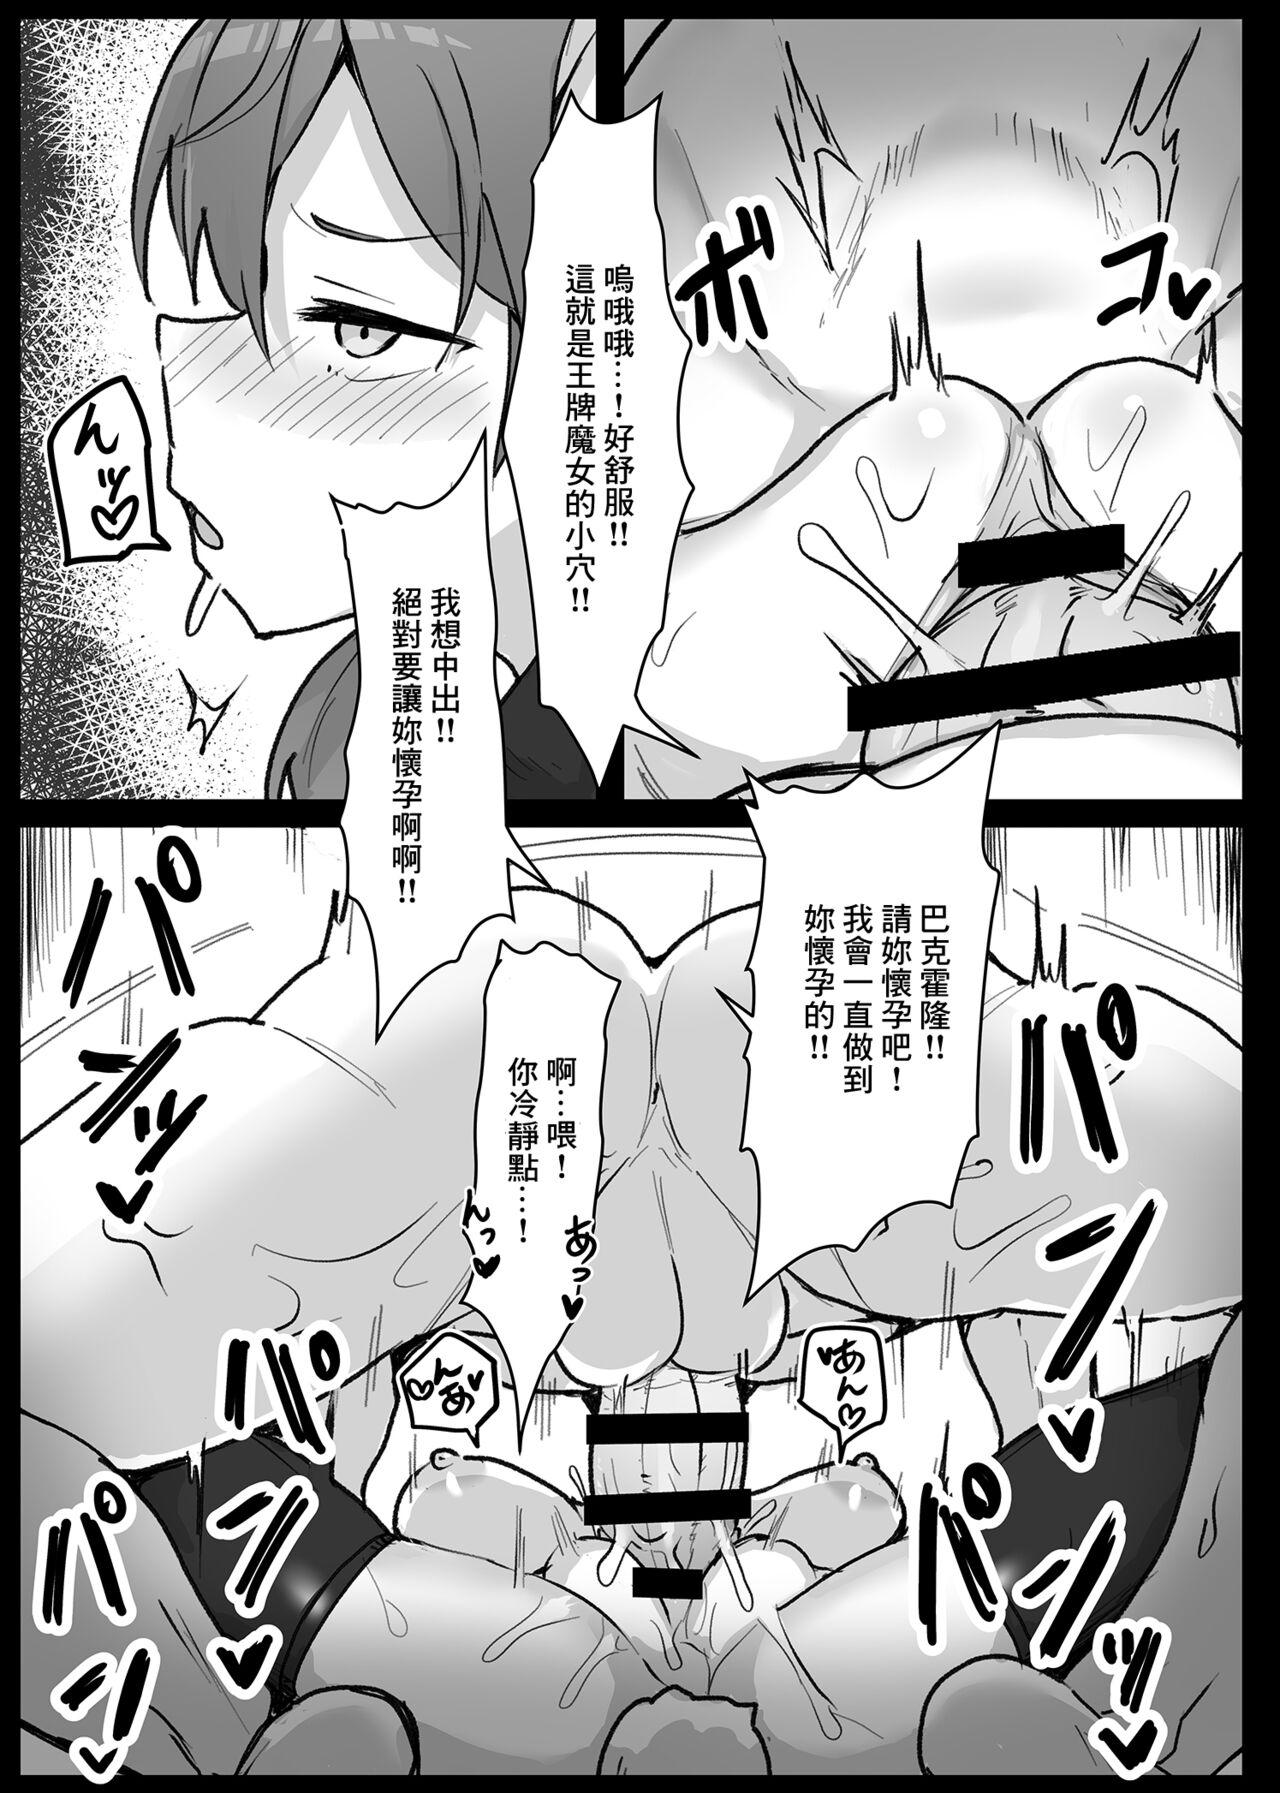 Cosplay Soapland 501 e Youkoso! - Strike witches Bottom - Page 7